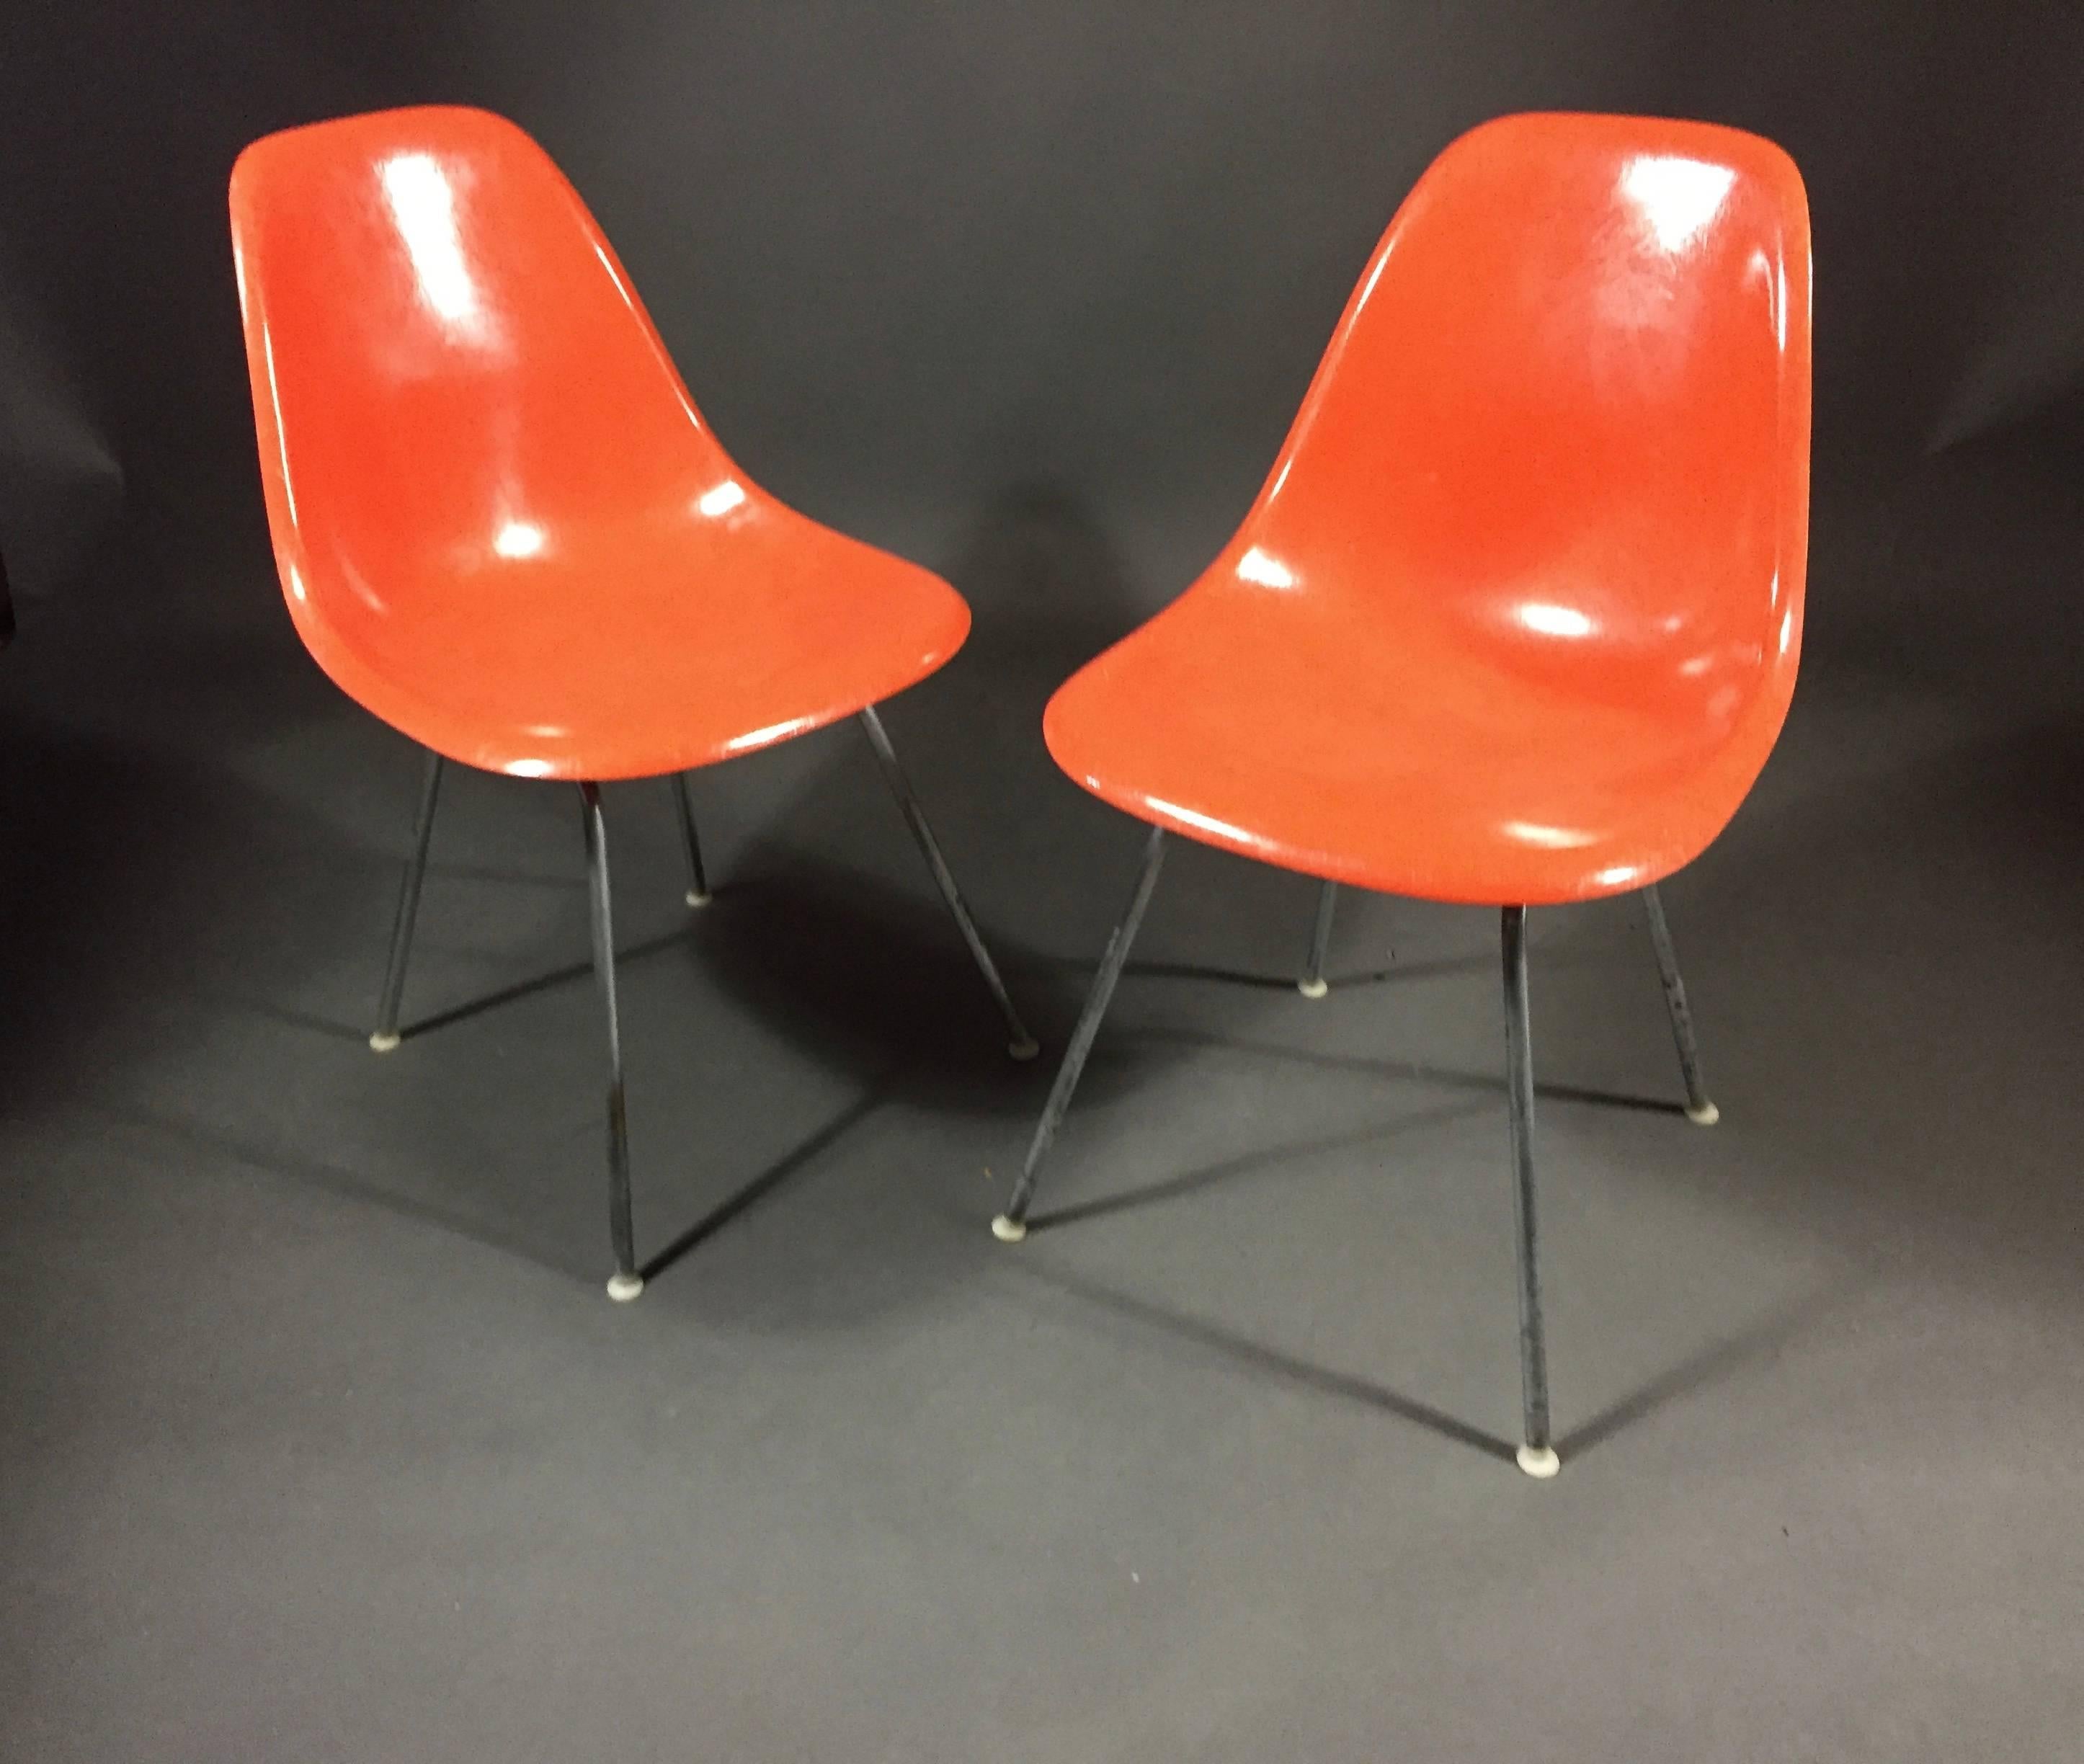 All original H base and orange fiberglass shell chairs by Charles and Ray Eames for Herman Miller. Late 1960s or early 1970s. Eight available in very good vintage condition with normal wear to metal legs all original plastic feet intact, shock